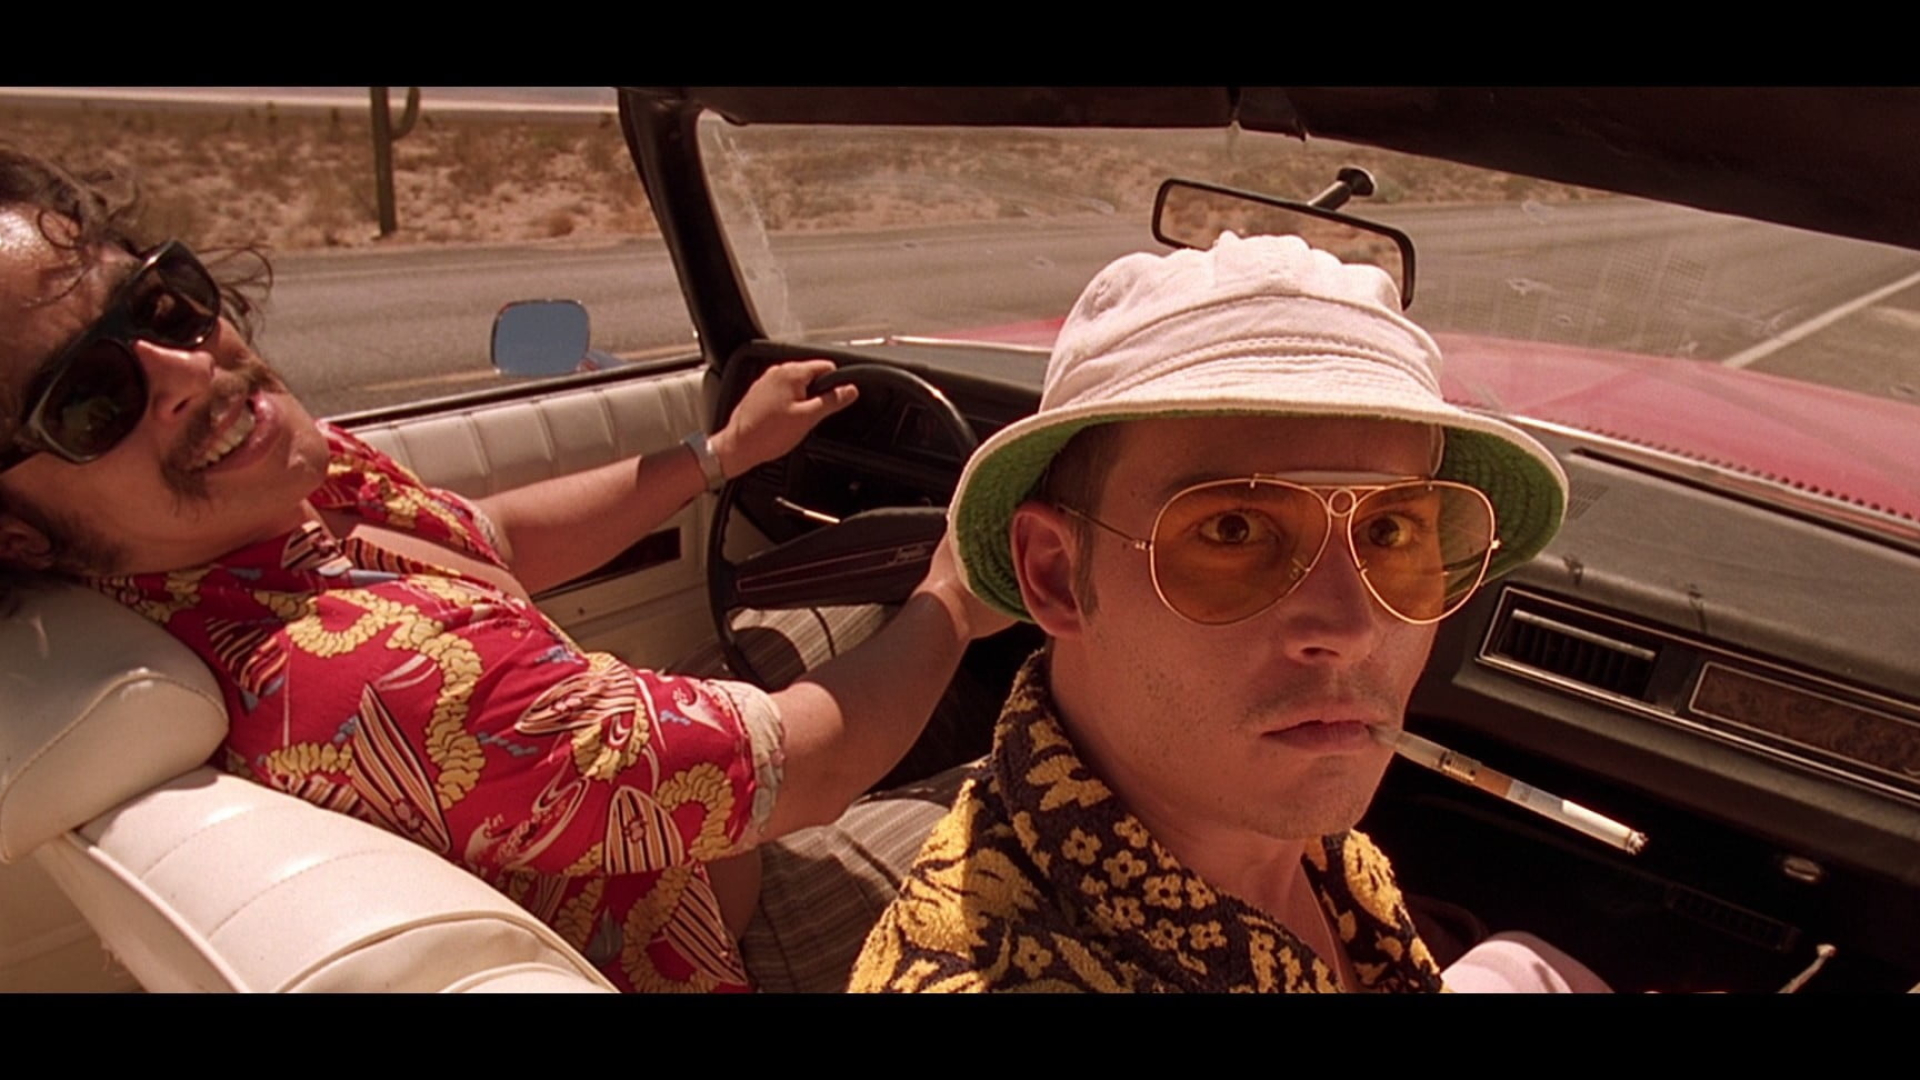 Hunter S. Thompson, Red and white textile, Fear and Loathing, Psychedelic artwork, 1920x1080 Full HD Desktop